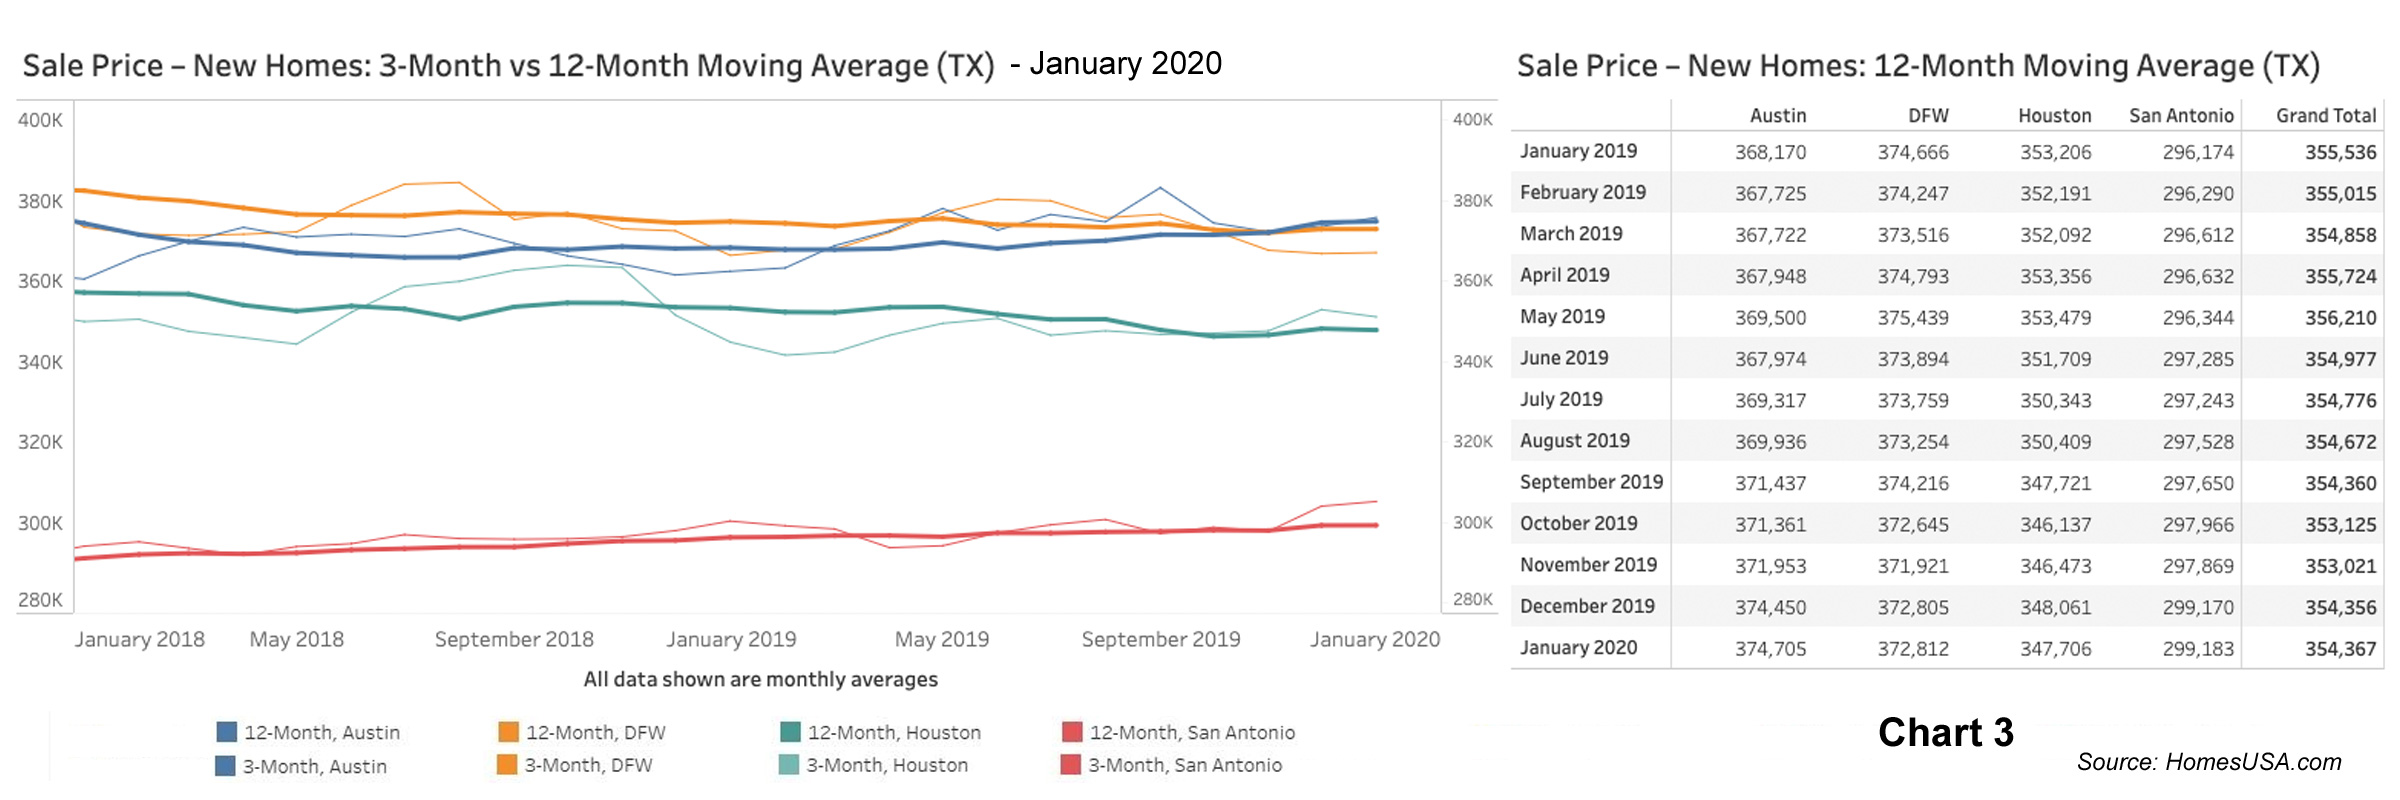 Chart 3: Texas New Home Prices - Jan 2020